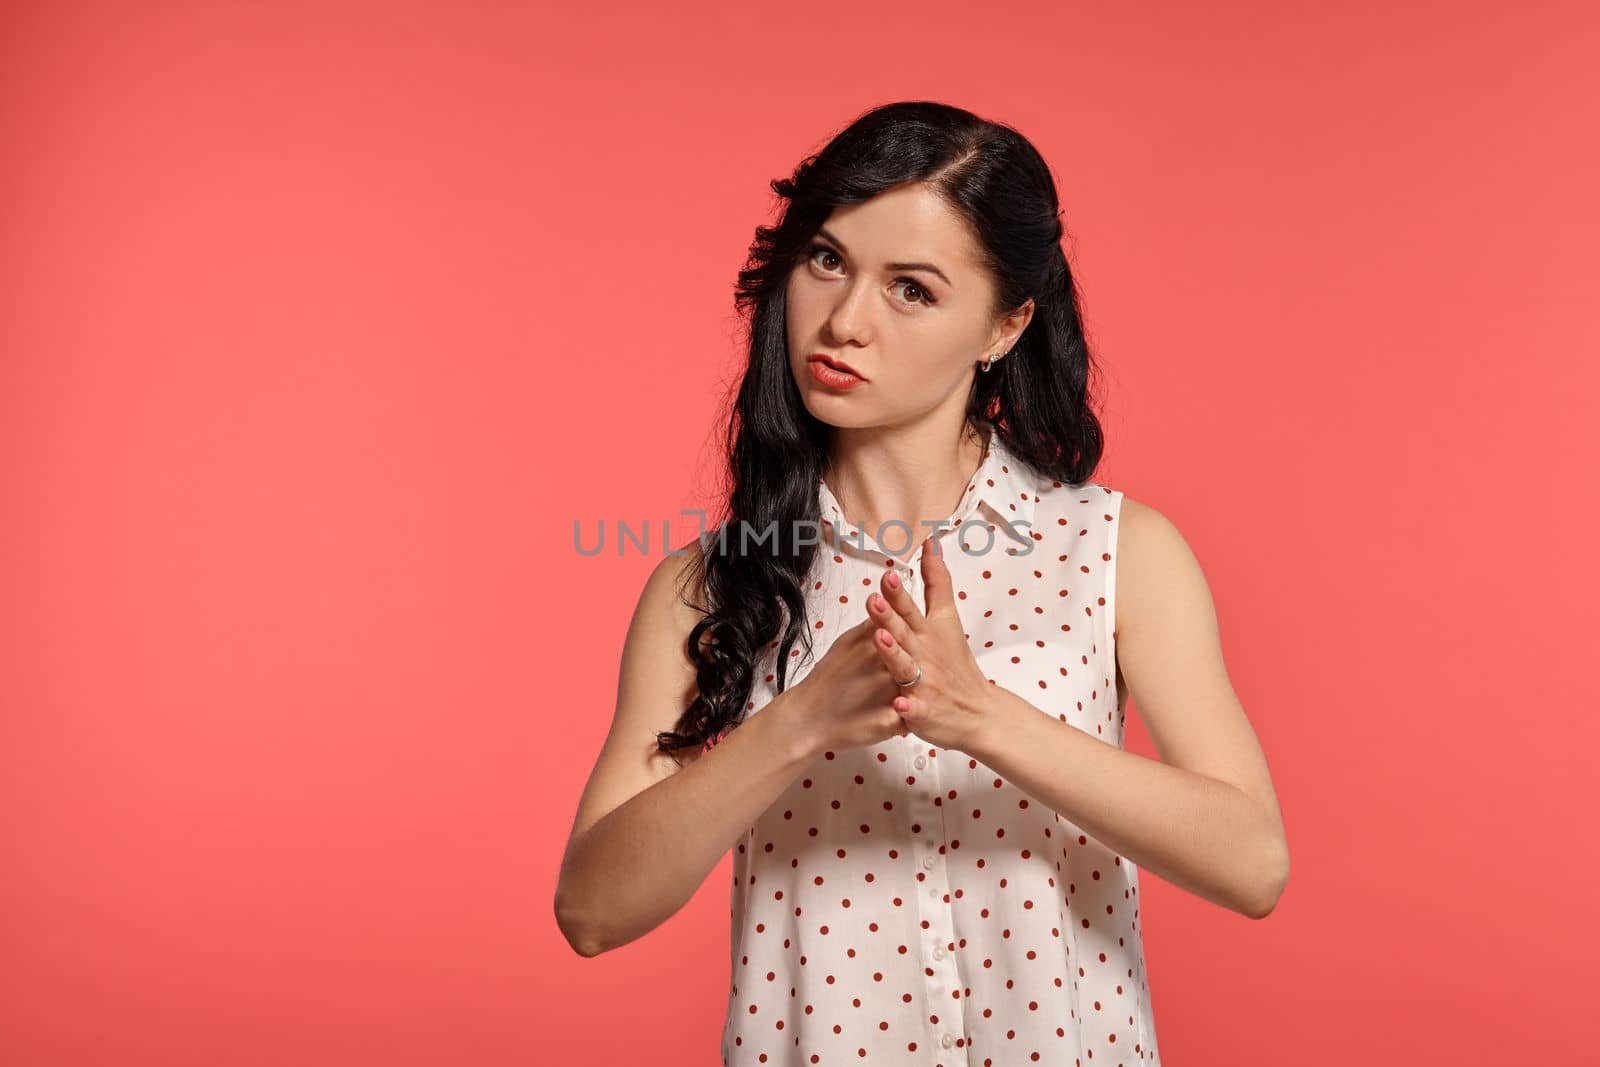 Studio shot of a cute teeny girl, wearing casual white polka dot blouse. Little brunette female is angry, looking at the camera while posing over a pink background. Gesticulation and sincere emotions concept.